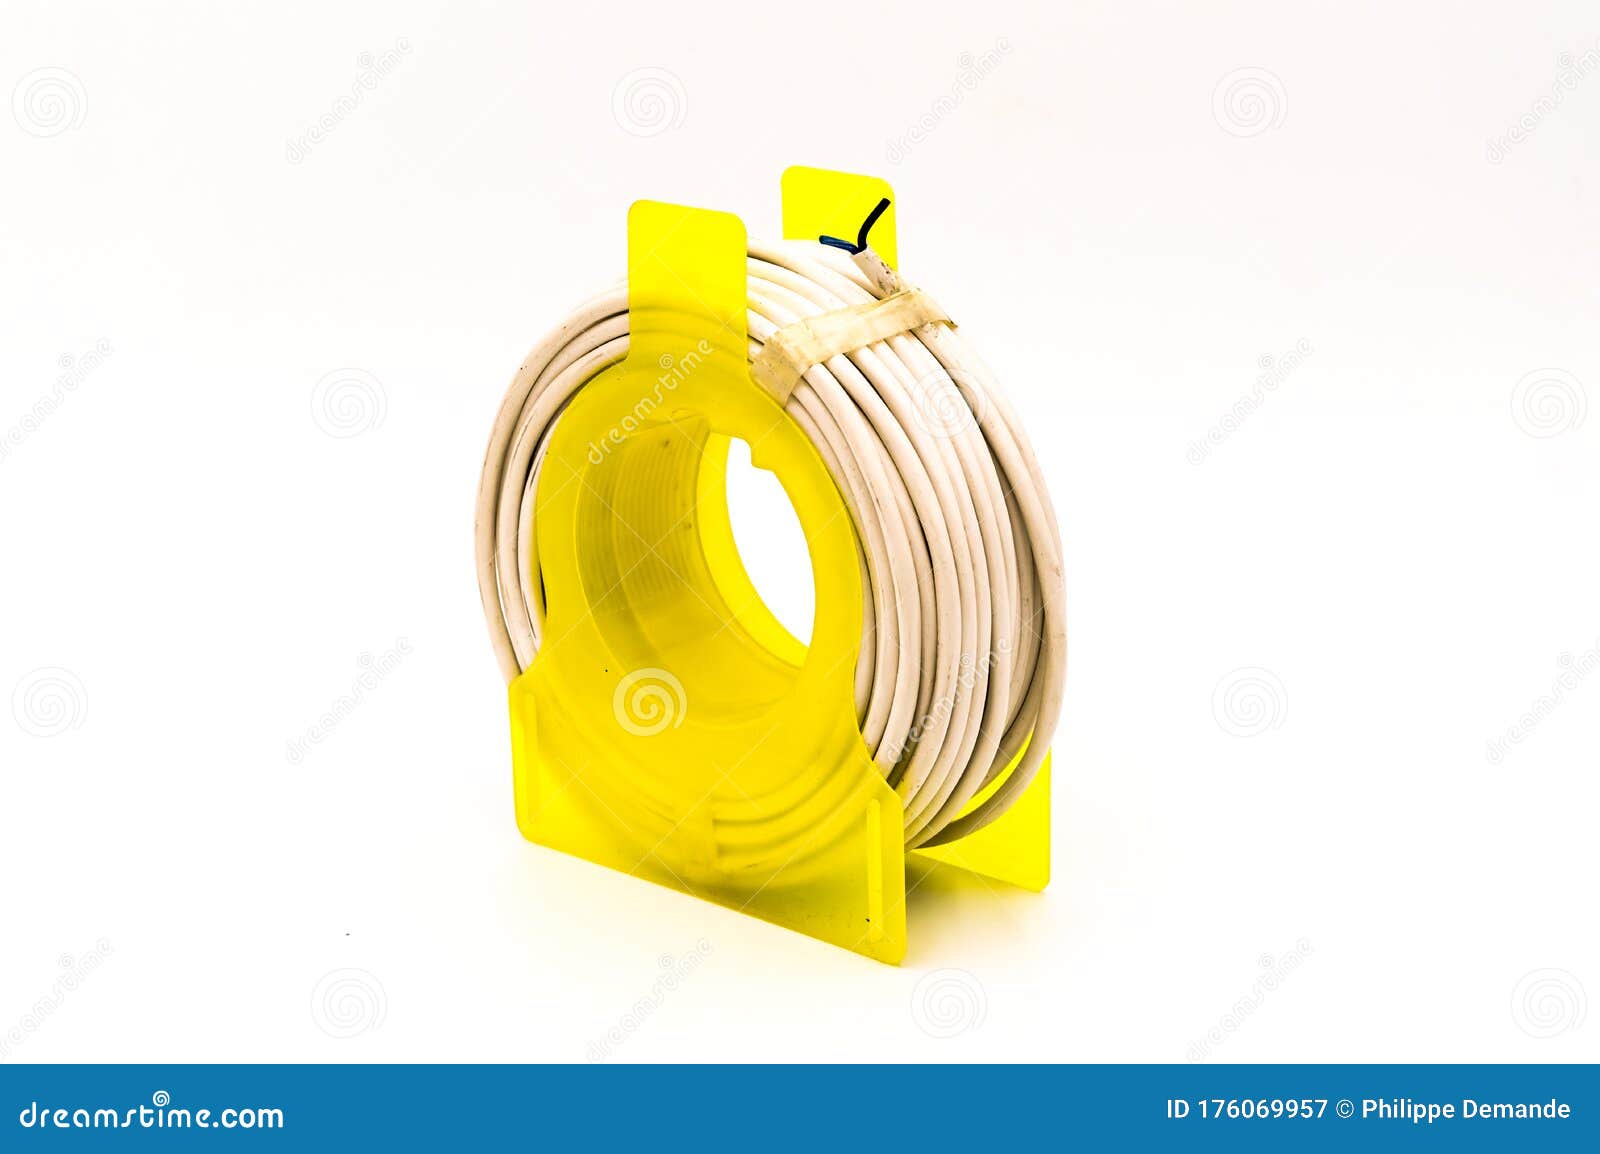 Small Cable Reel Drum Isolated Stock Image - Image of heating